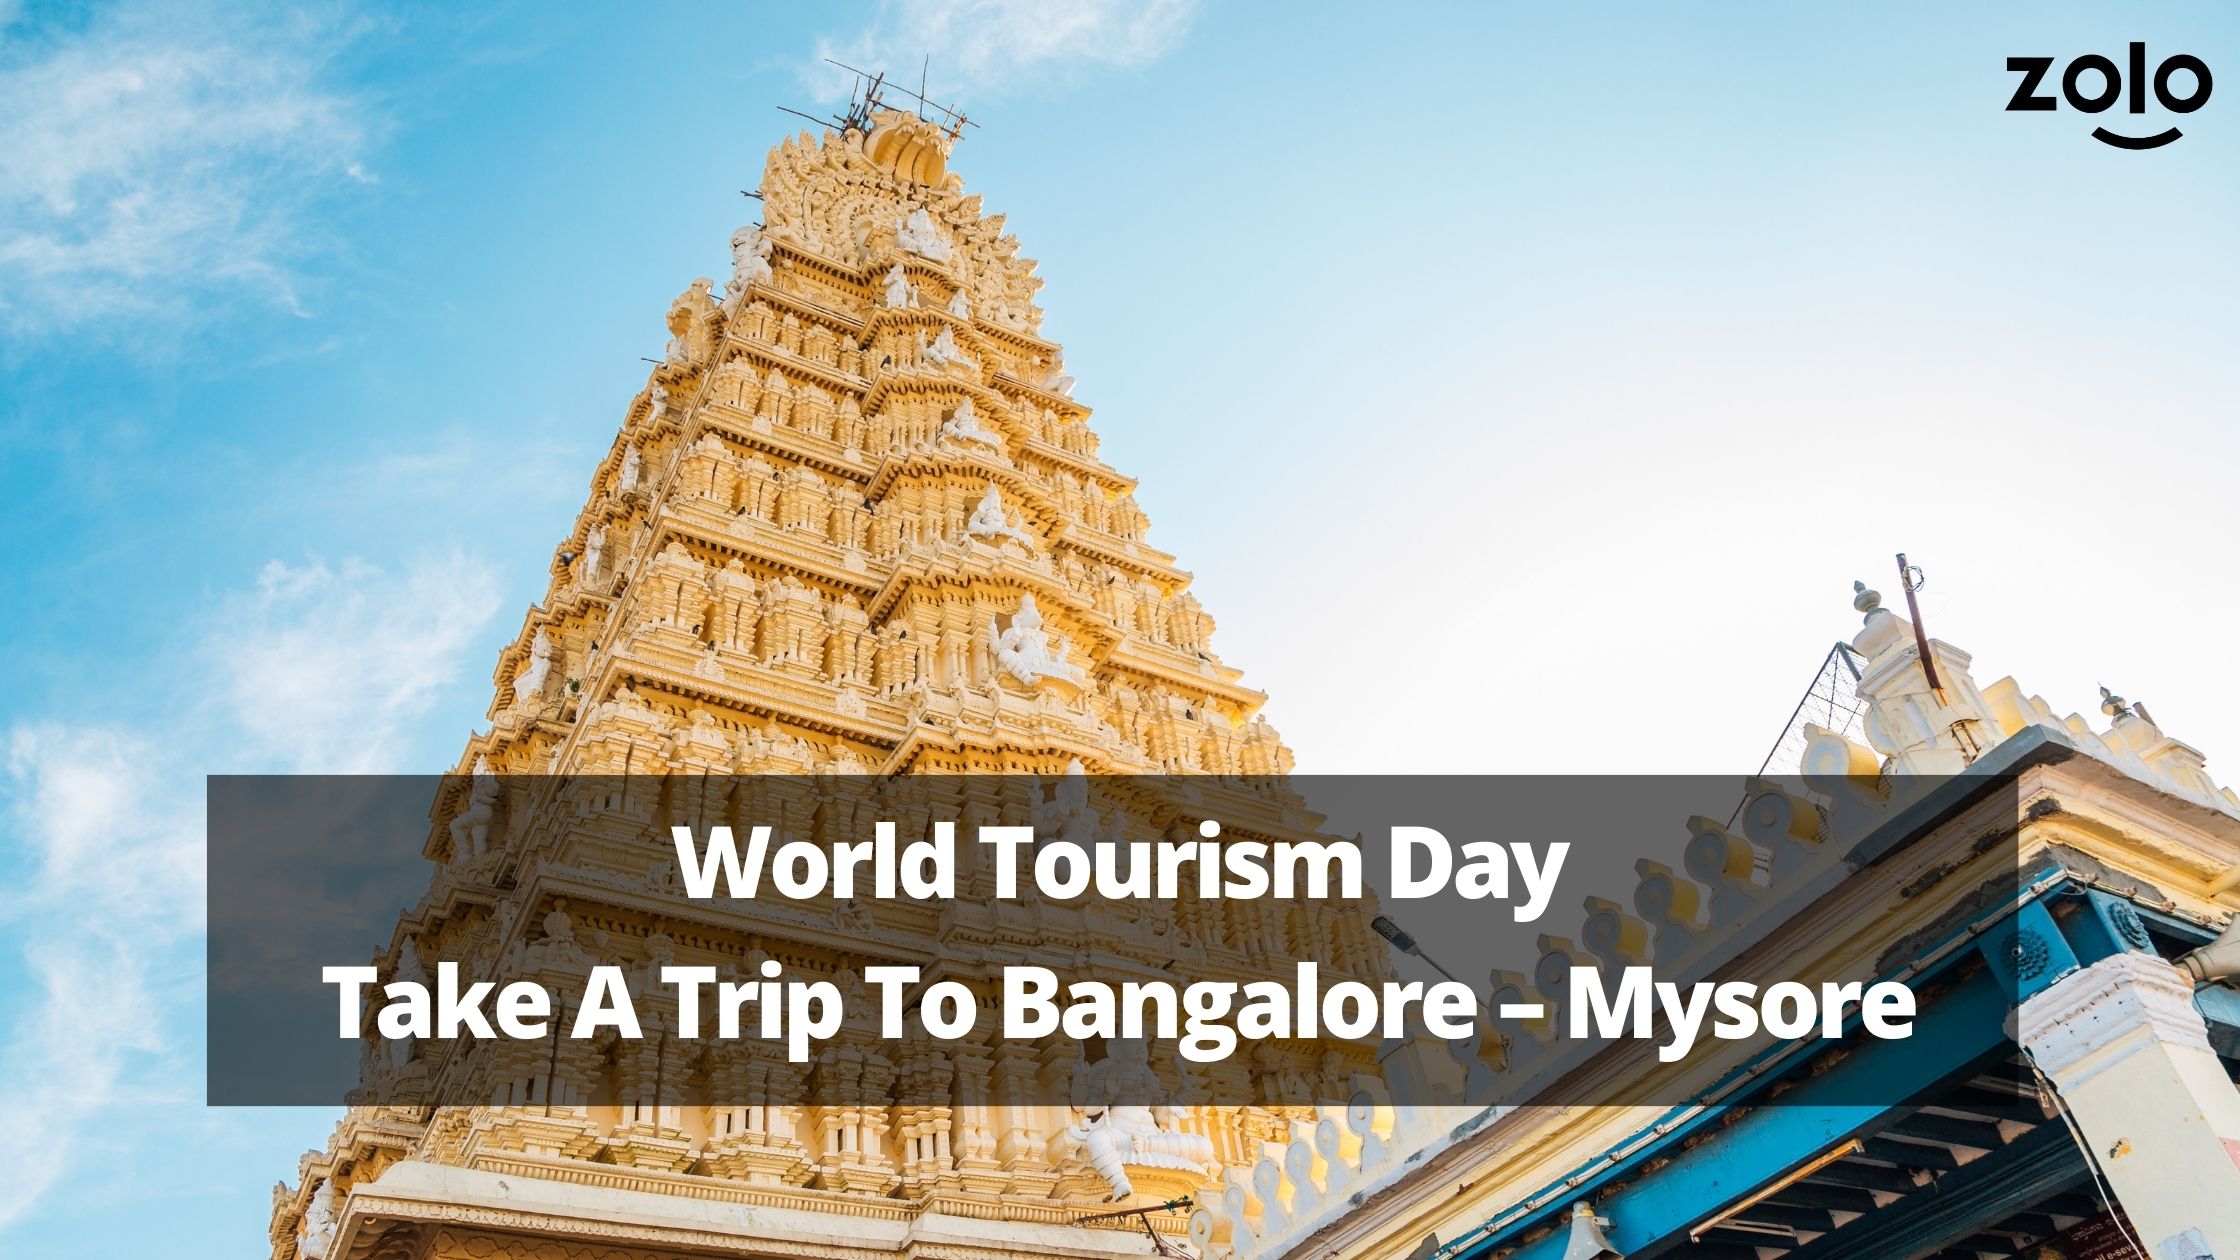 Exploring the Top Attractions in Bangalore - Zolo Blog